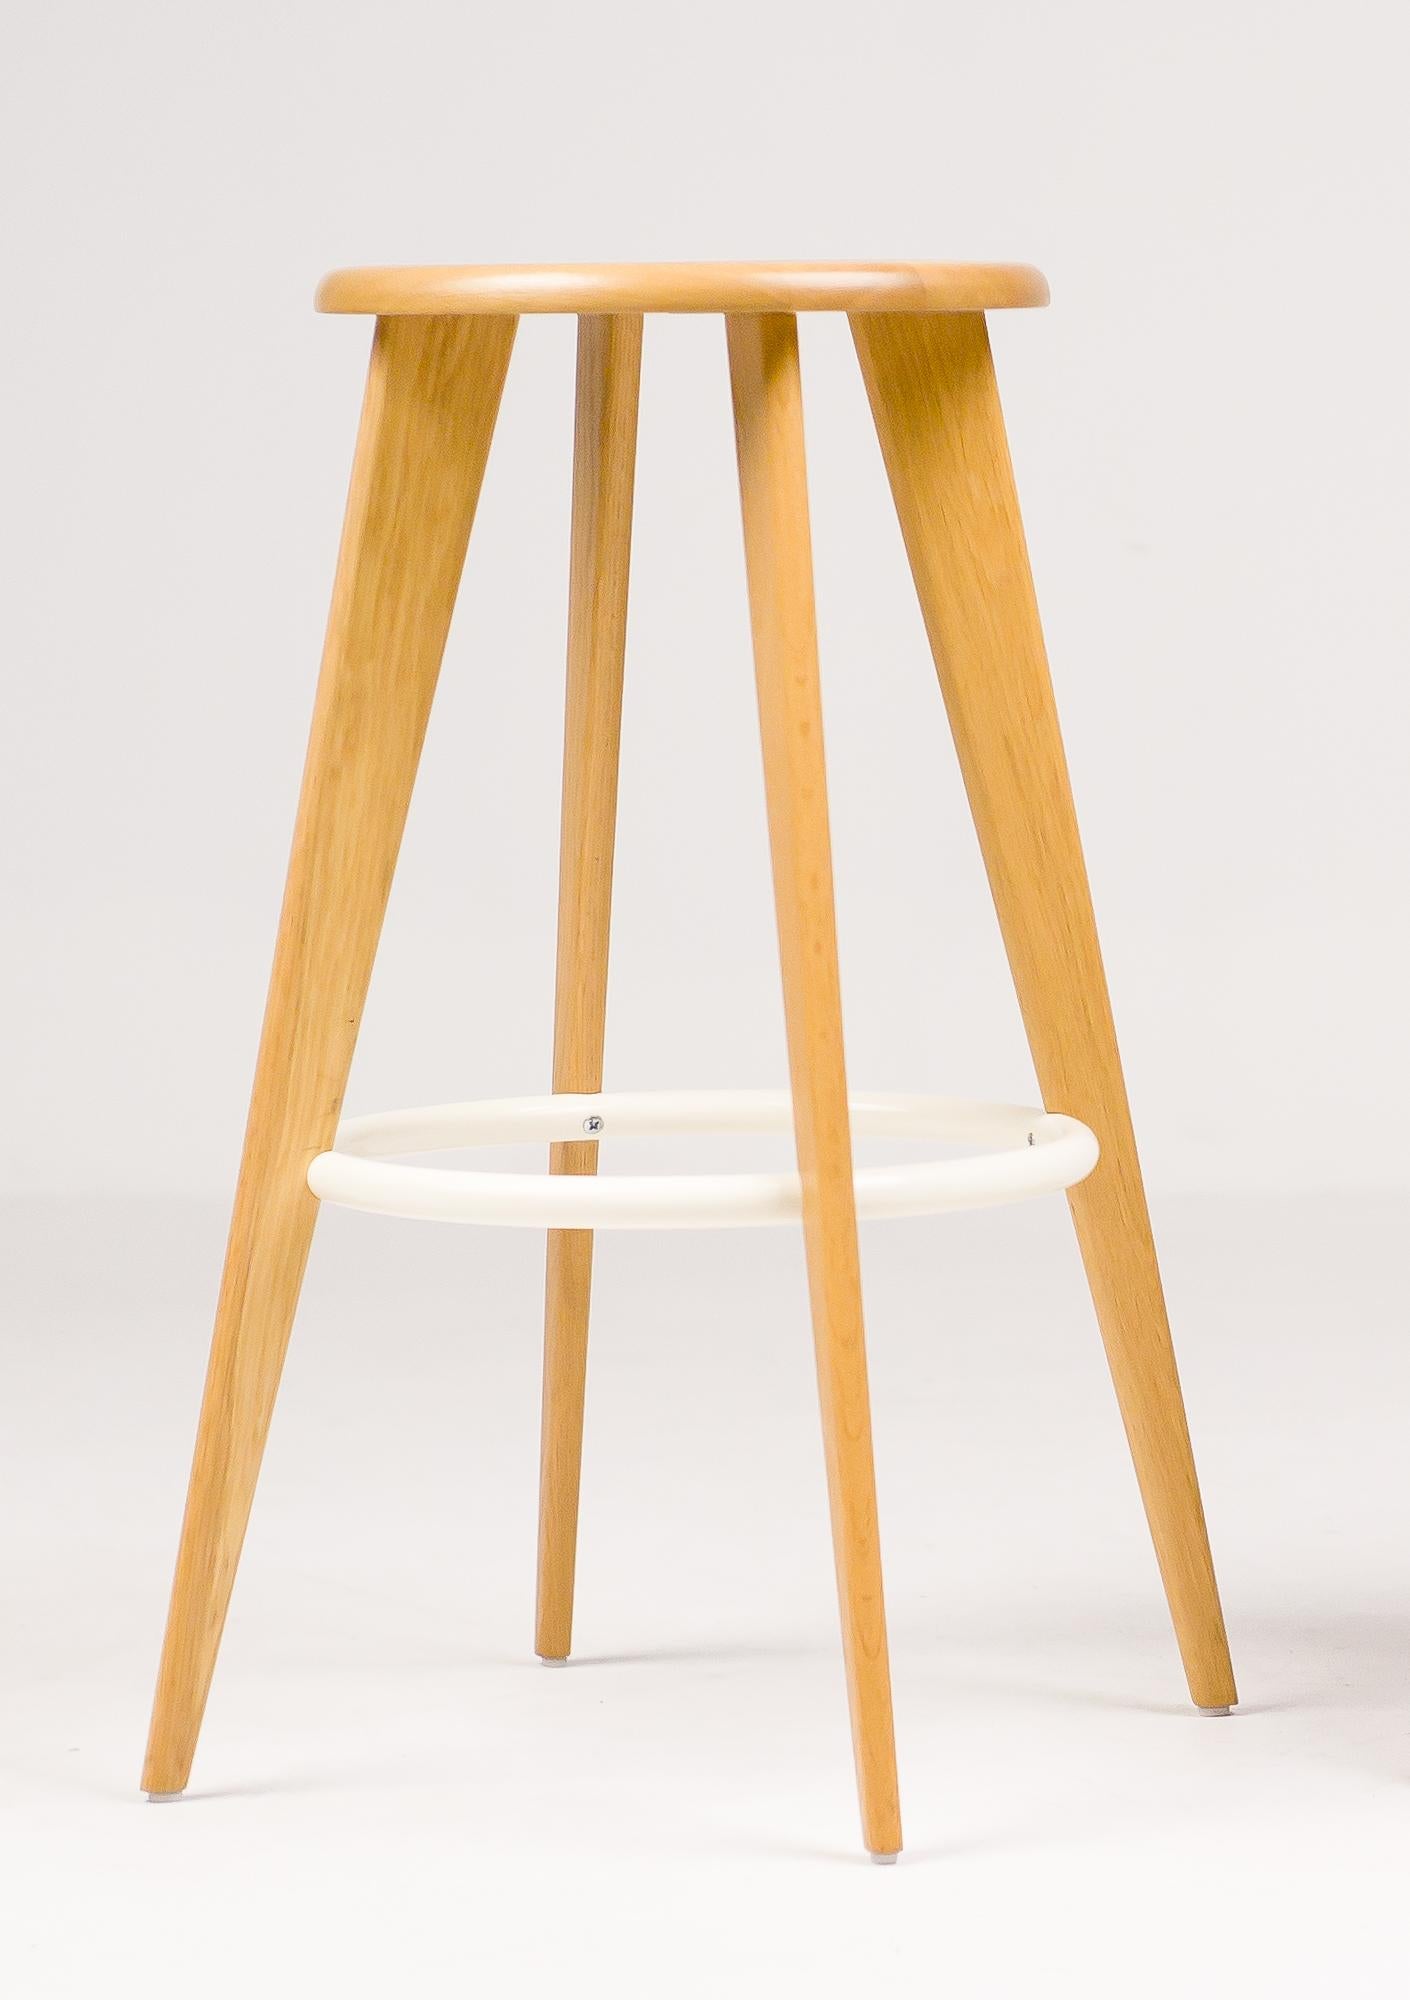 The Tabouret Haut bar stool designed by Jean Prouvé and made by Vitra is based on the basic shape of the Classic bar stool. Crafted from oak conform the classic Tabouret Haut. 
Natural oak, off-white enameled steel ring.
Rare version, no langer in